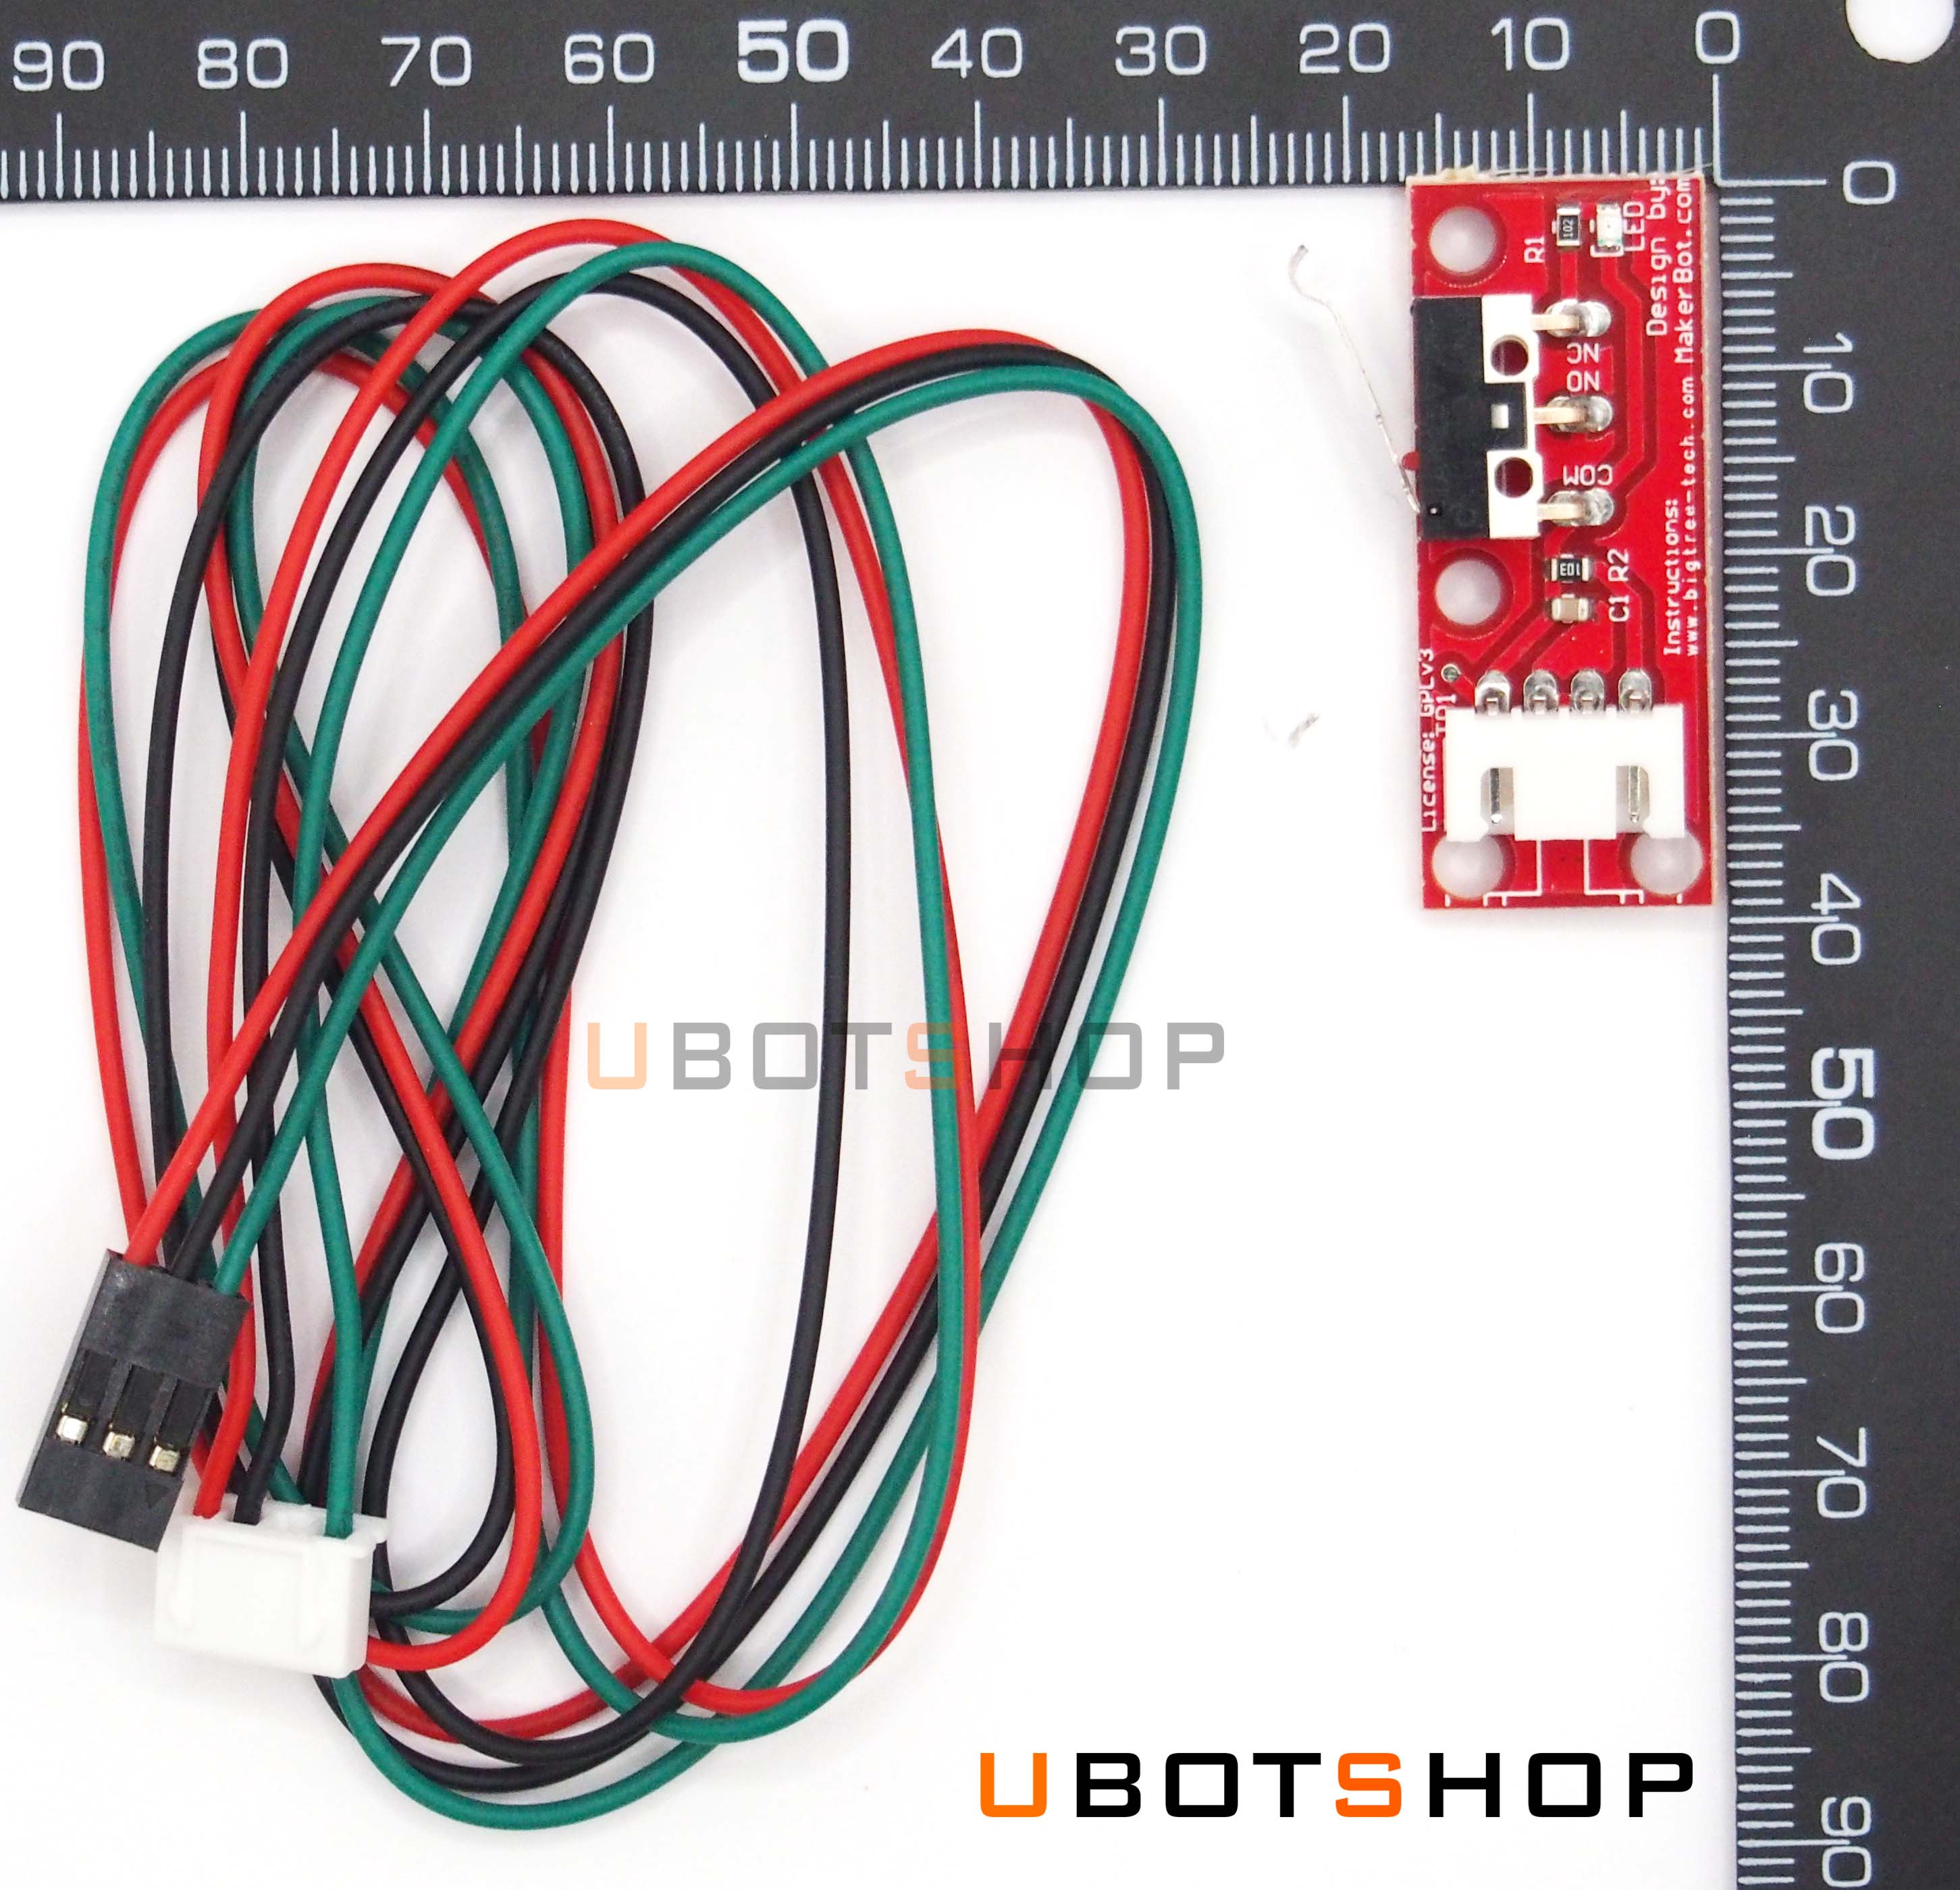  Endstop Mechanical Limit Switch RAMPS 1.4 Fit for 3D Printer (SM0013)